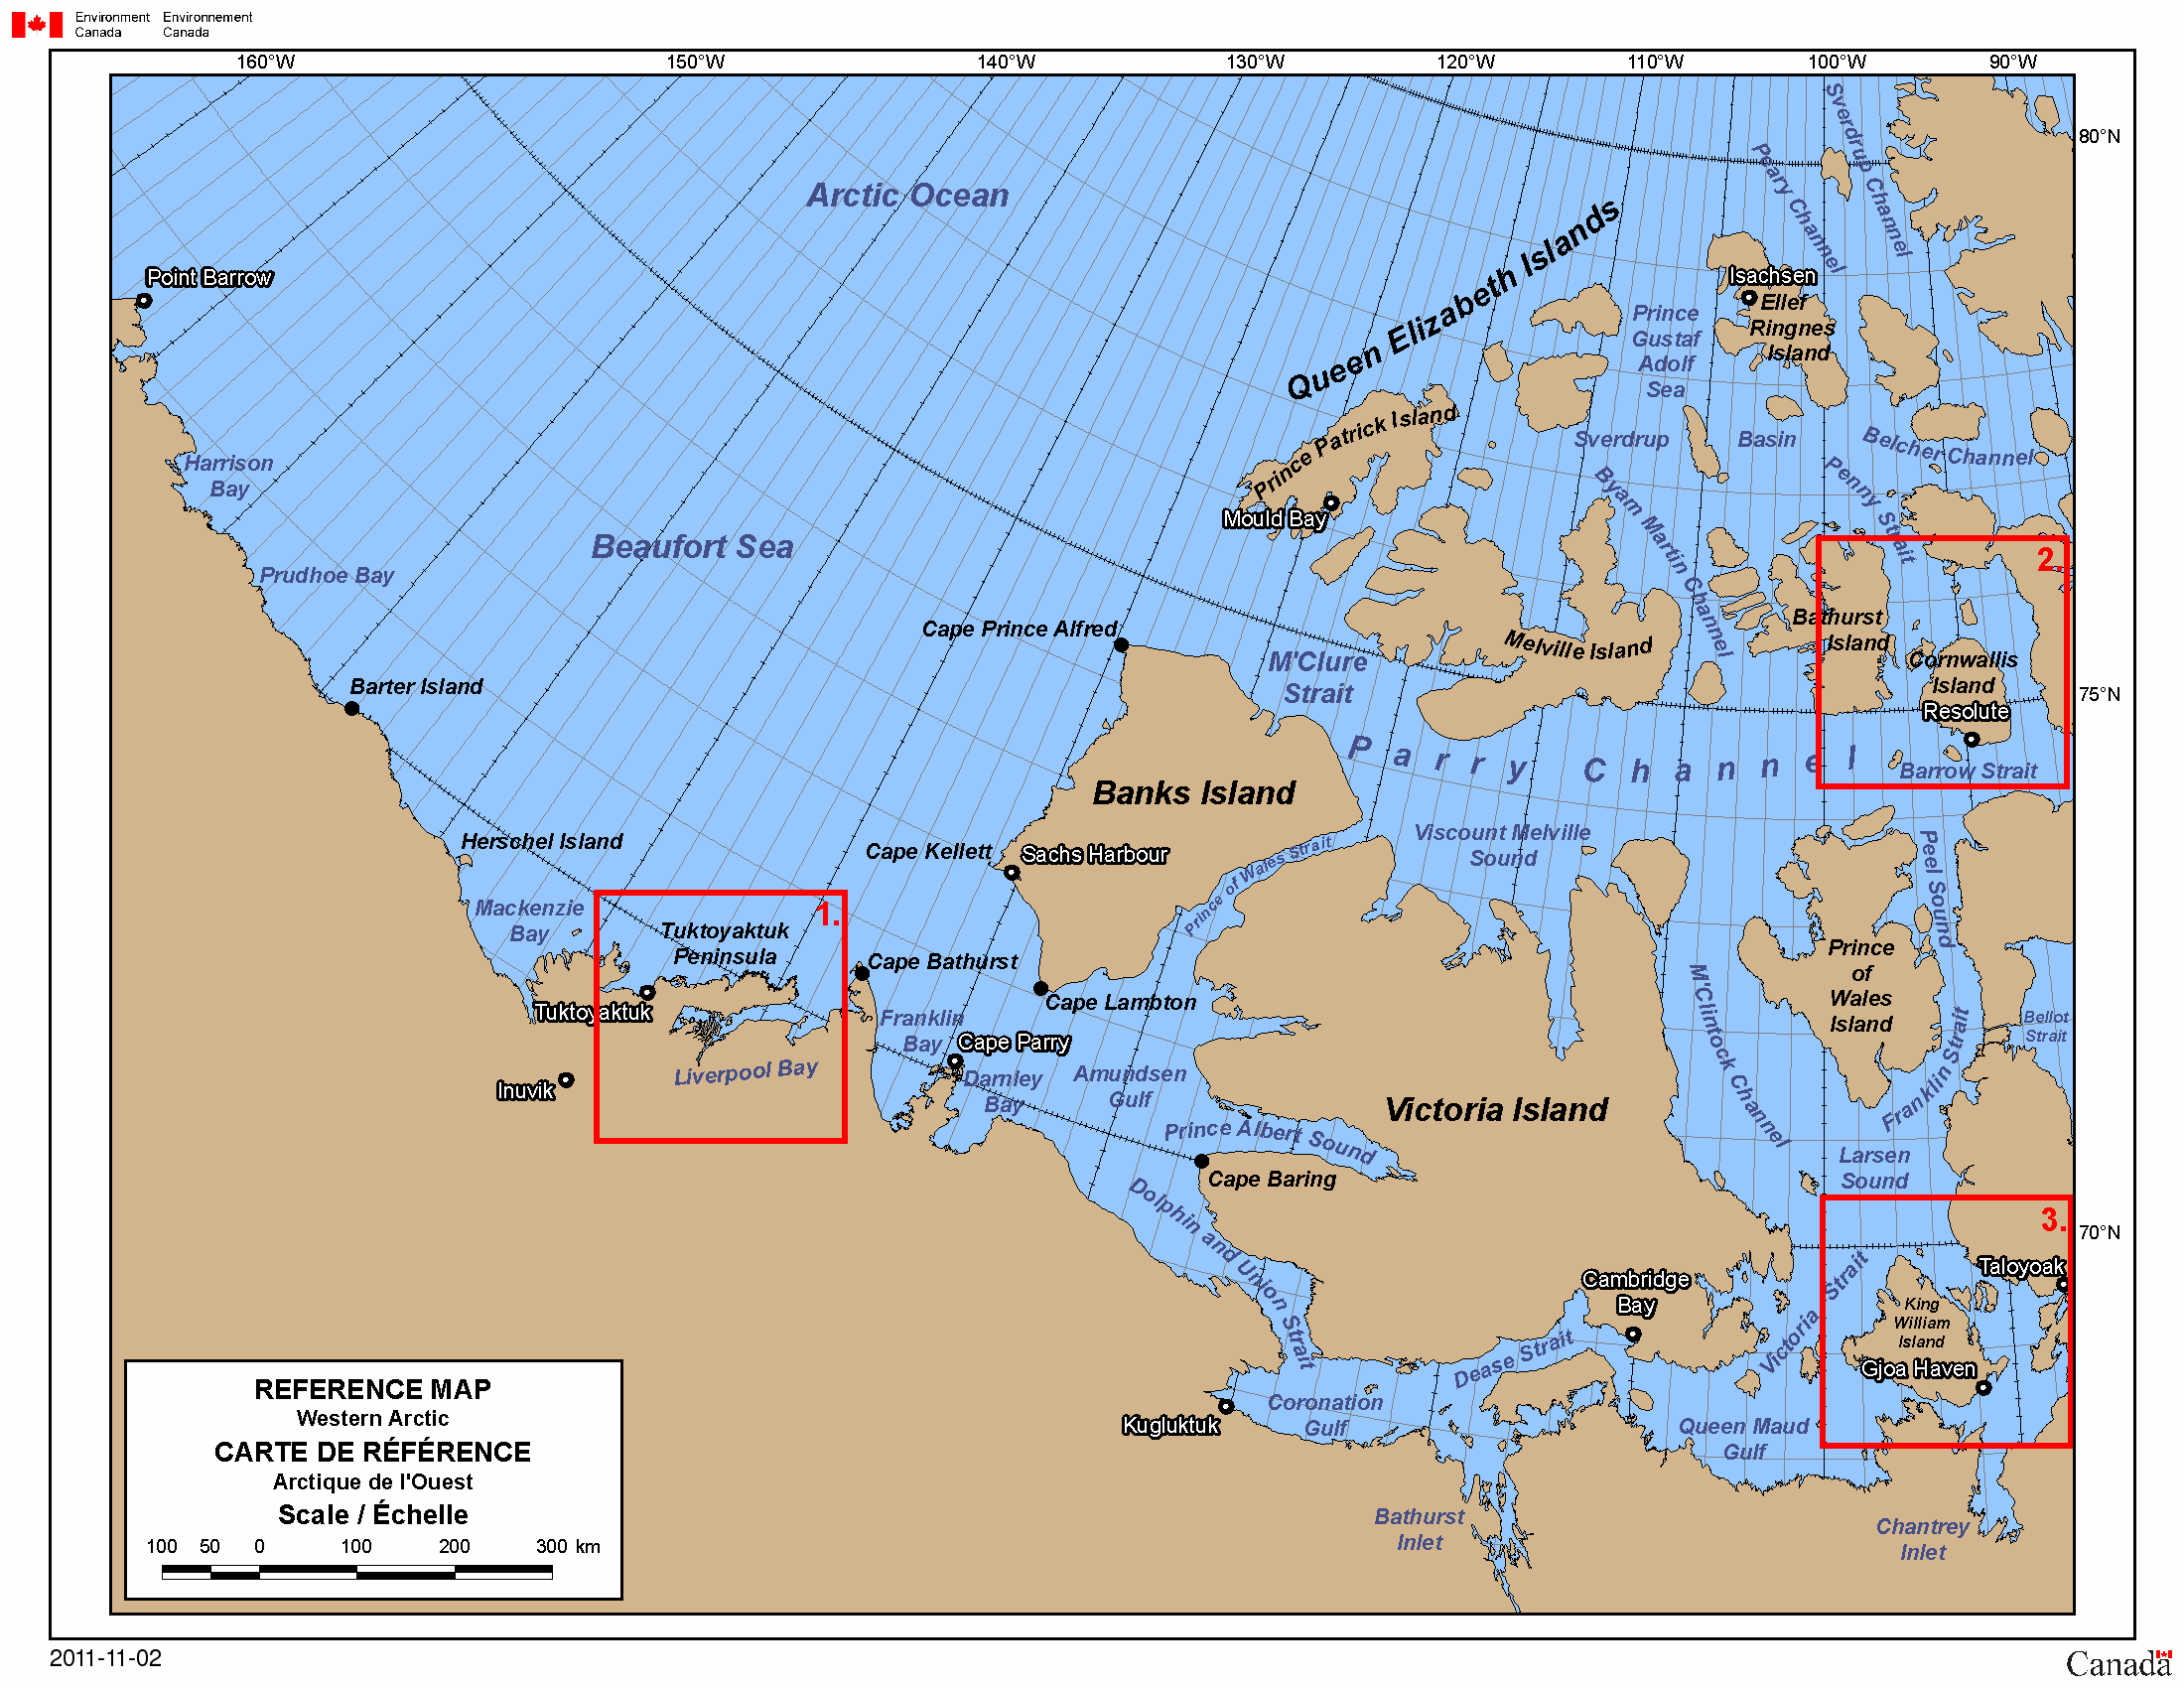 Map of Western Arctic (160° to 90° West and 80° to 68° North)